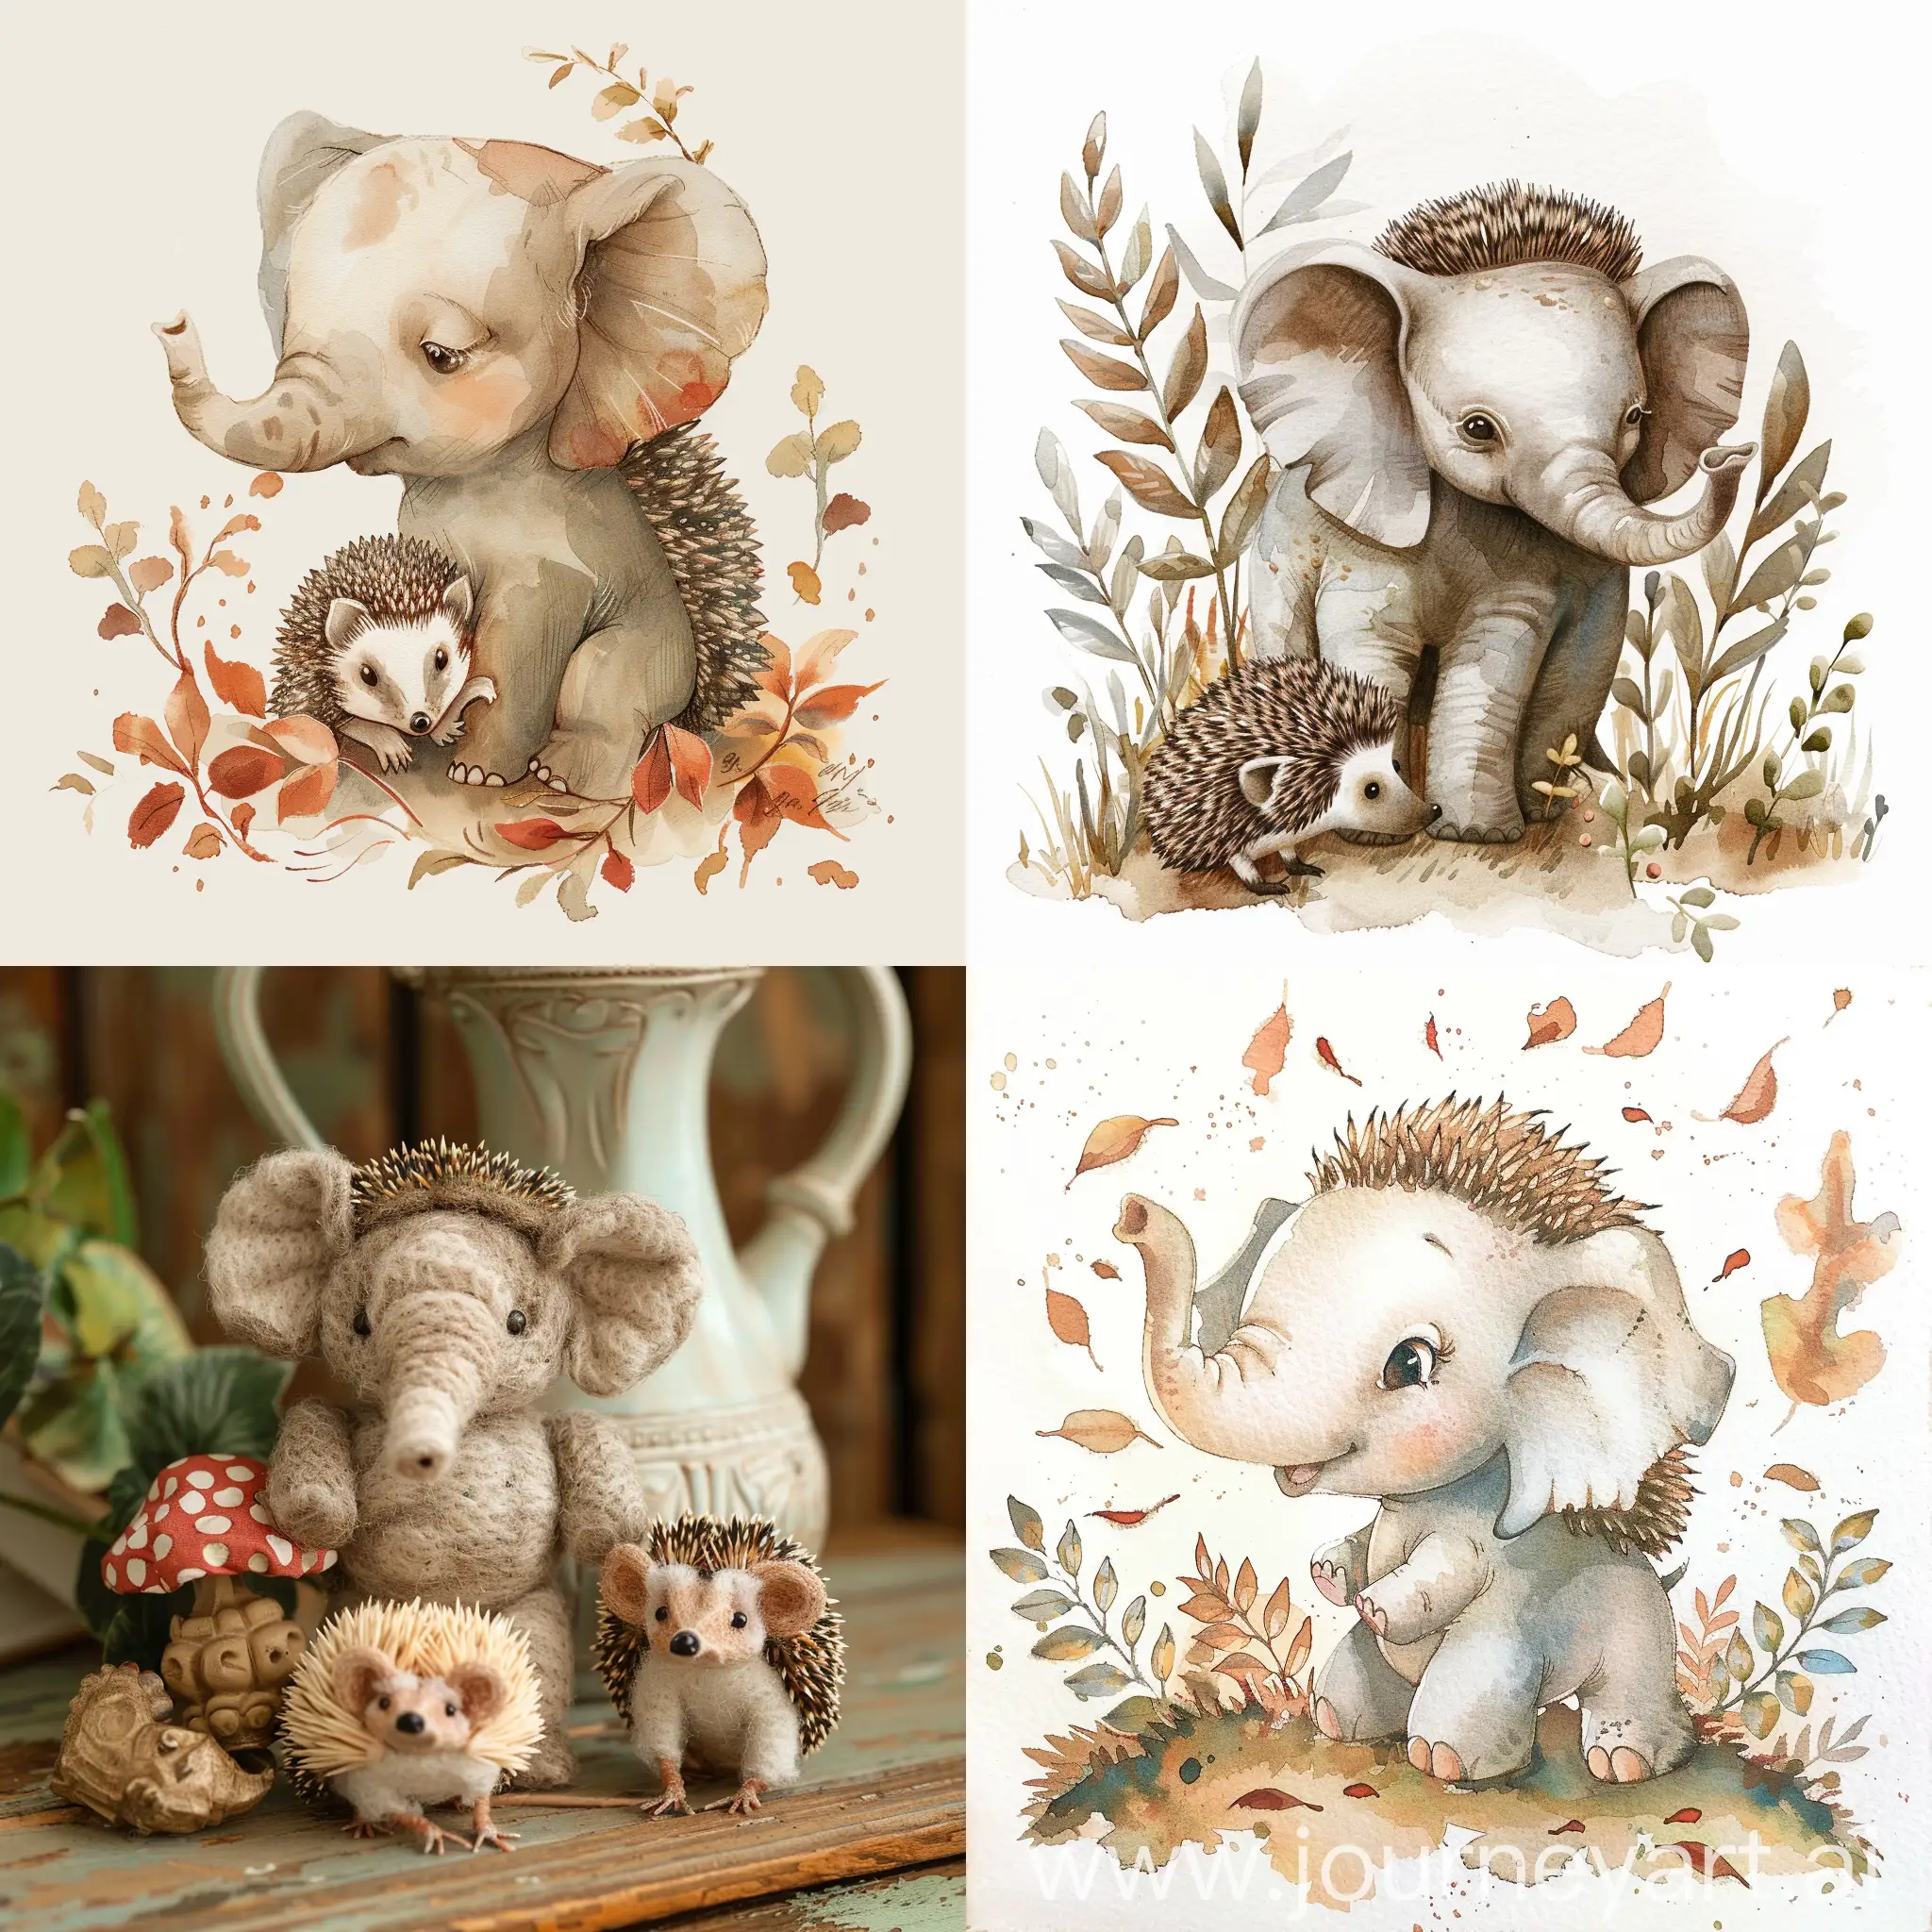 Adorable-Baby-Elephant-and-Hedgehog-Playing-Together-in-Forest